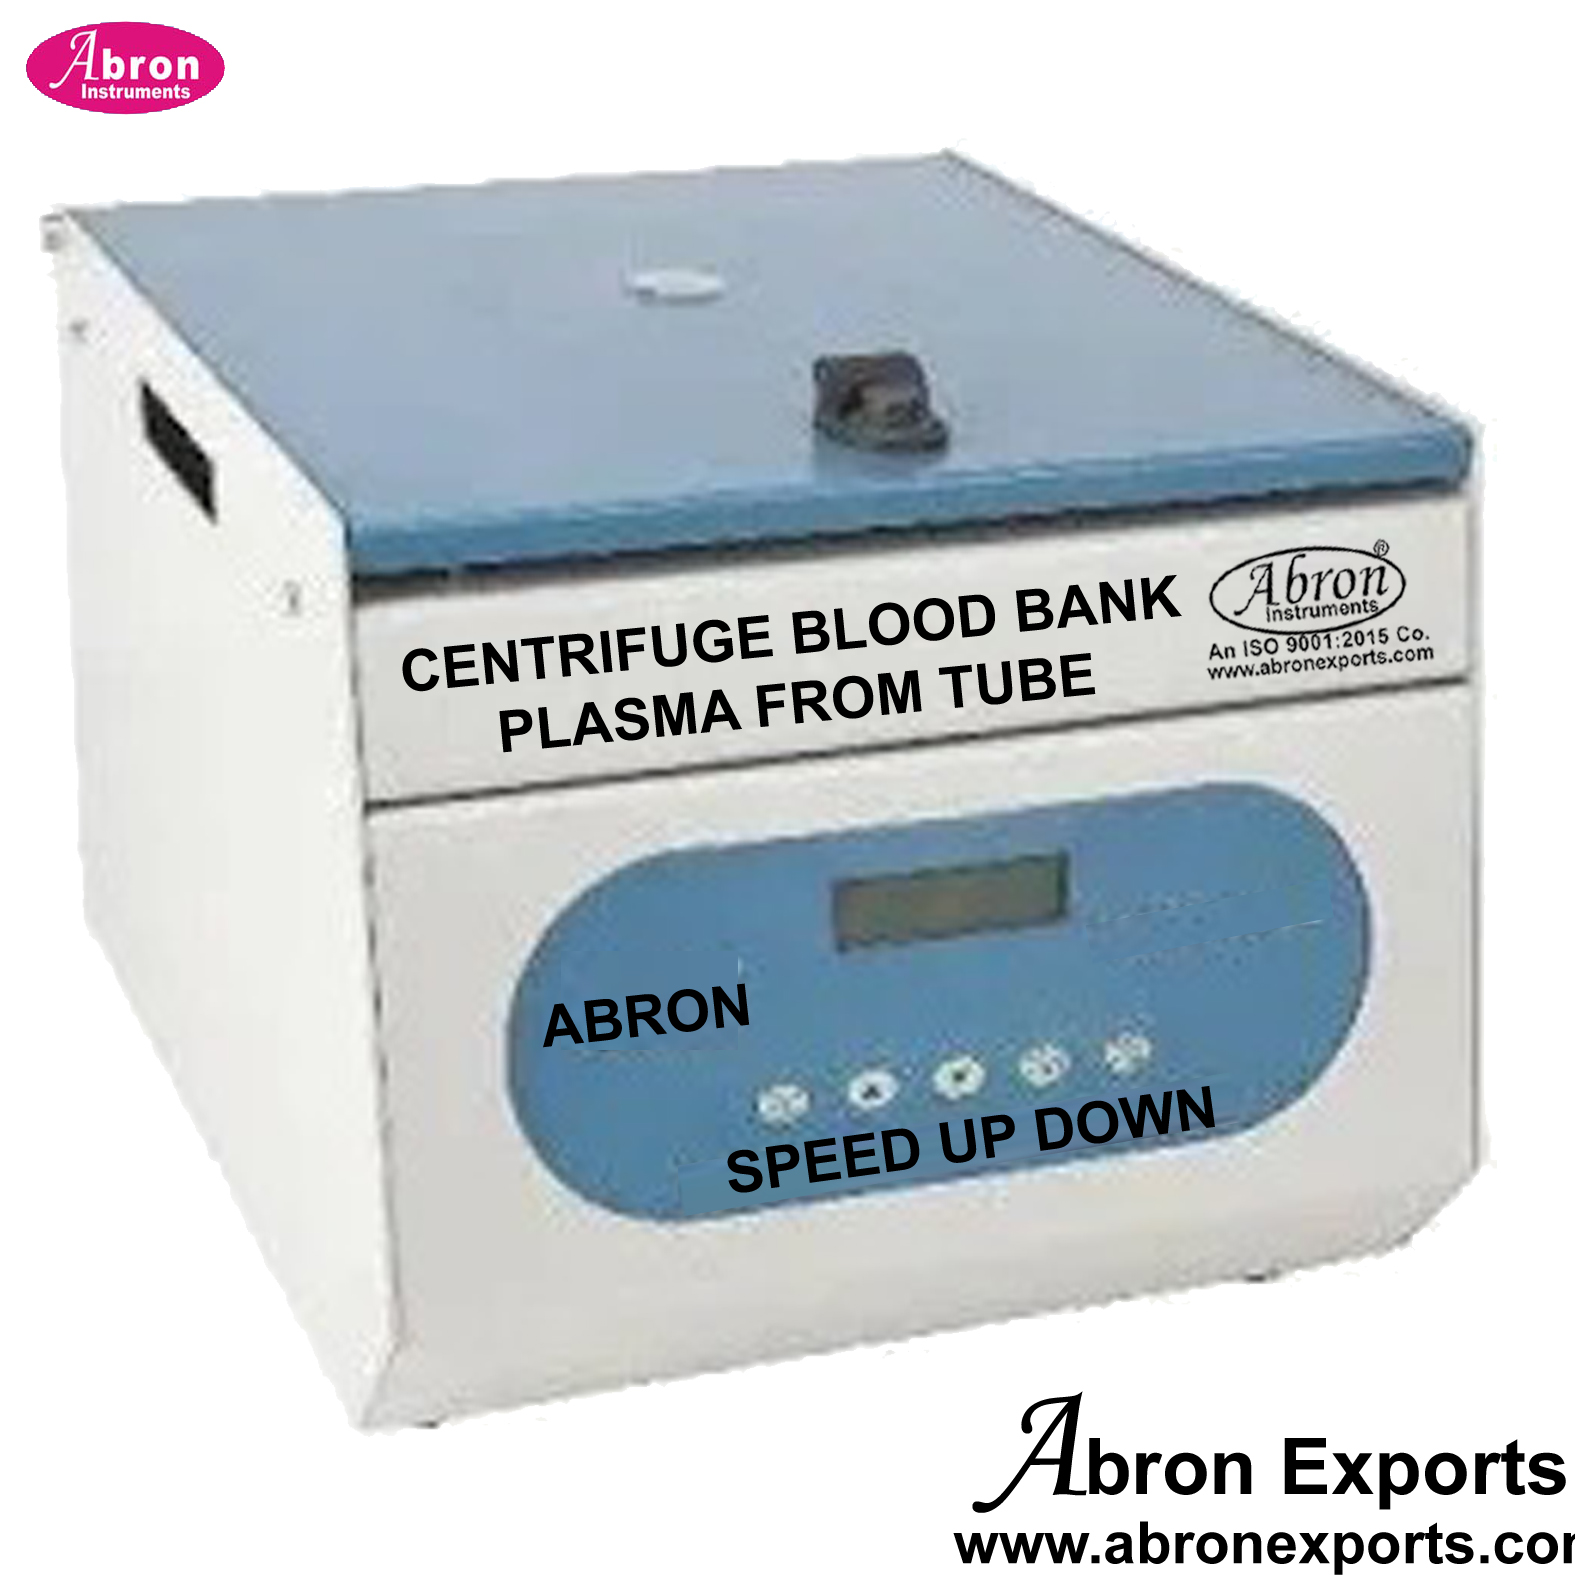 Centrifuge Blood Bank Digital With Speed Regulator for 1 Pack of 200ml Electric Abron ABM-2692C2H 